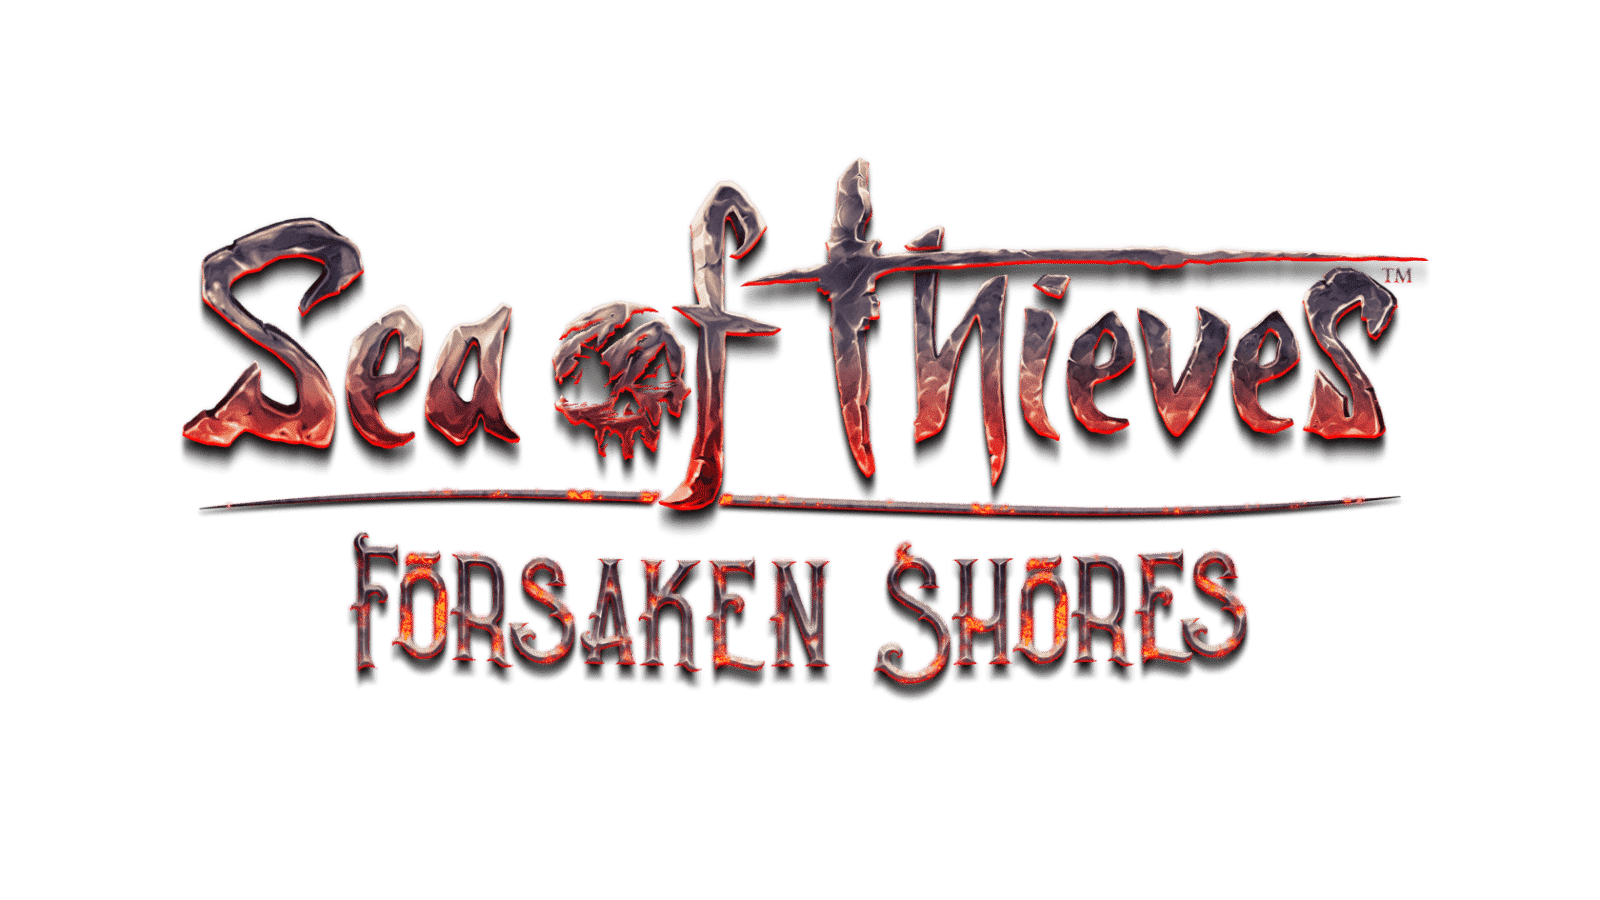 Sea of ​​Thieves Forsaken Shores "width =" 1028 "height =" 578 ​​"srcset =" https://www.gametainment.at/wp-content/uploads/2018/09/Forsaken_Shores_Logo.png 1680w, https: // www. gametainment.at/wp-content/uploads/2018/09/Forsaken_Shores_Logo-768x432.png 768w, https://www.gametainment.at/wp-content/uploads/2018/09/Forsaken_Shores_Logo-50x28.png 50w, https: //www.gametainment.at/wp-content/uploads/2018/09/Forsaken_Shores_Logo-622x350.png 622w, https://www.gametainment.at/wp-content/uploads/2018/09/Forsaken_Shores_Logo-180x101.png 180w "sizes =" (max-width: 1028px) 100vw, 1028px